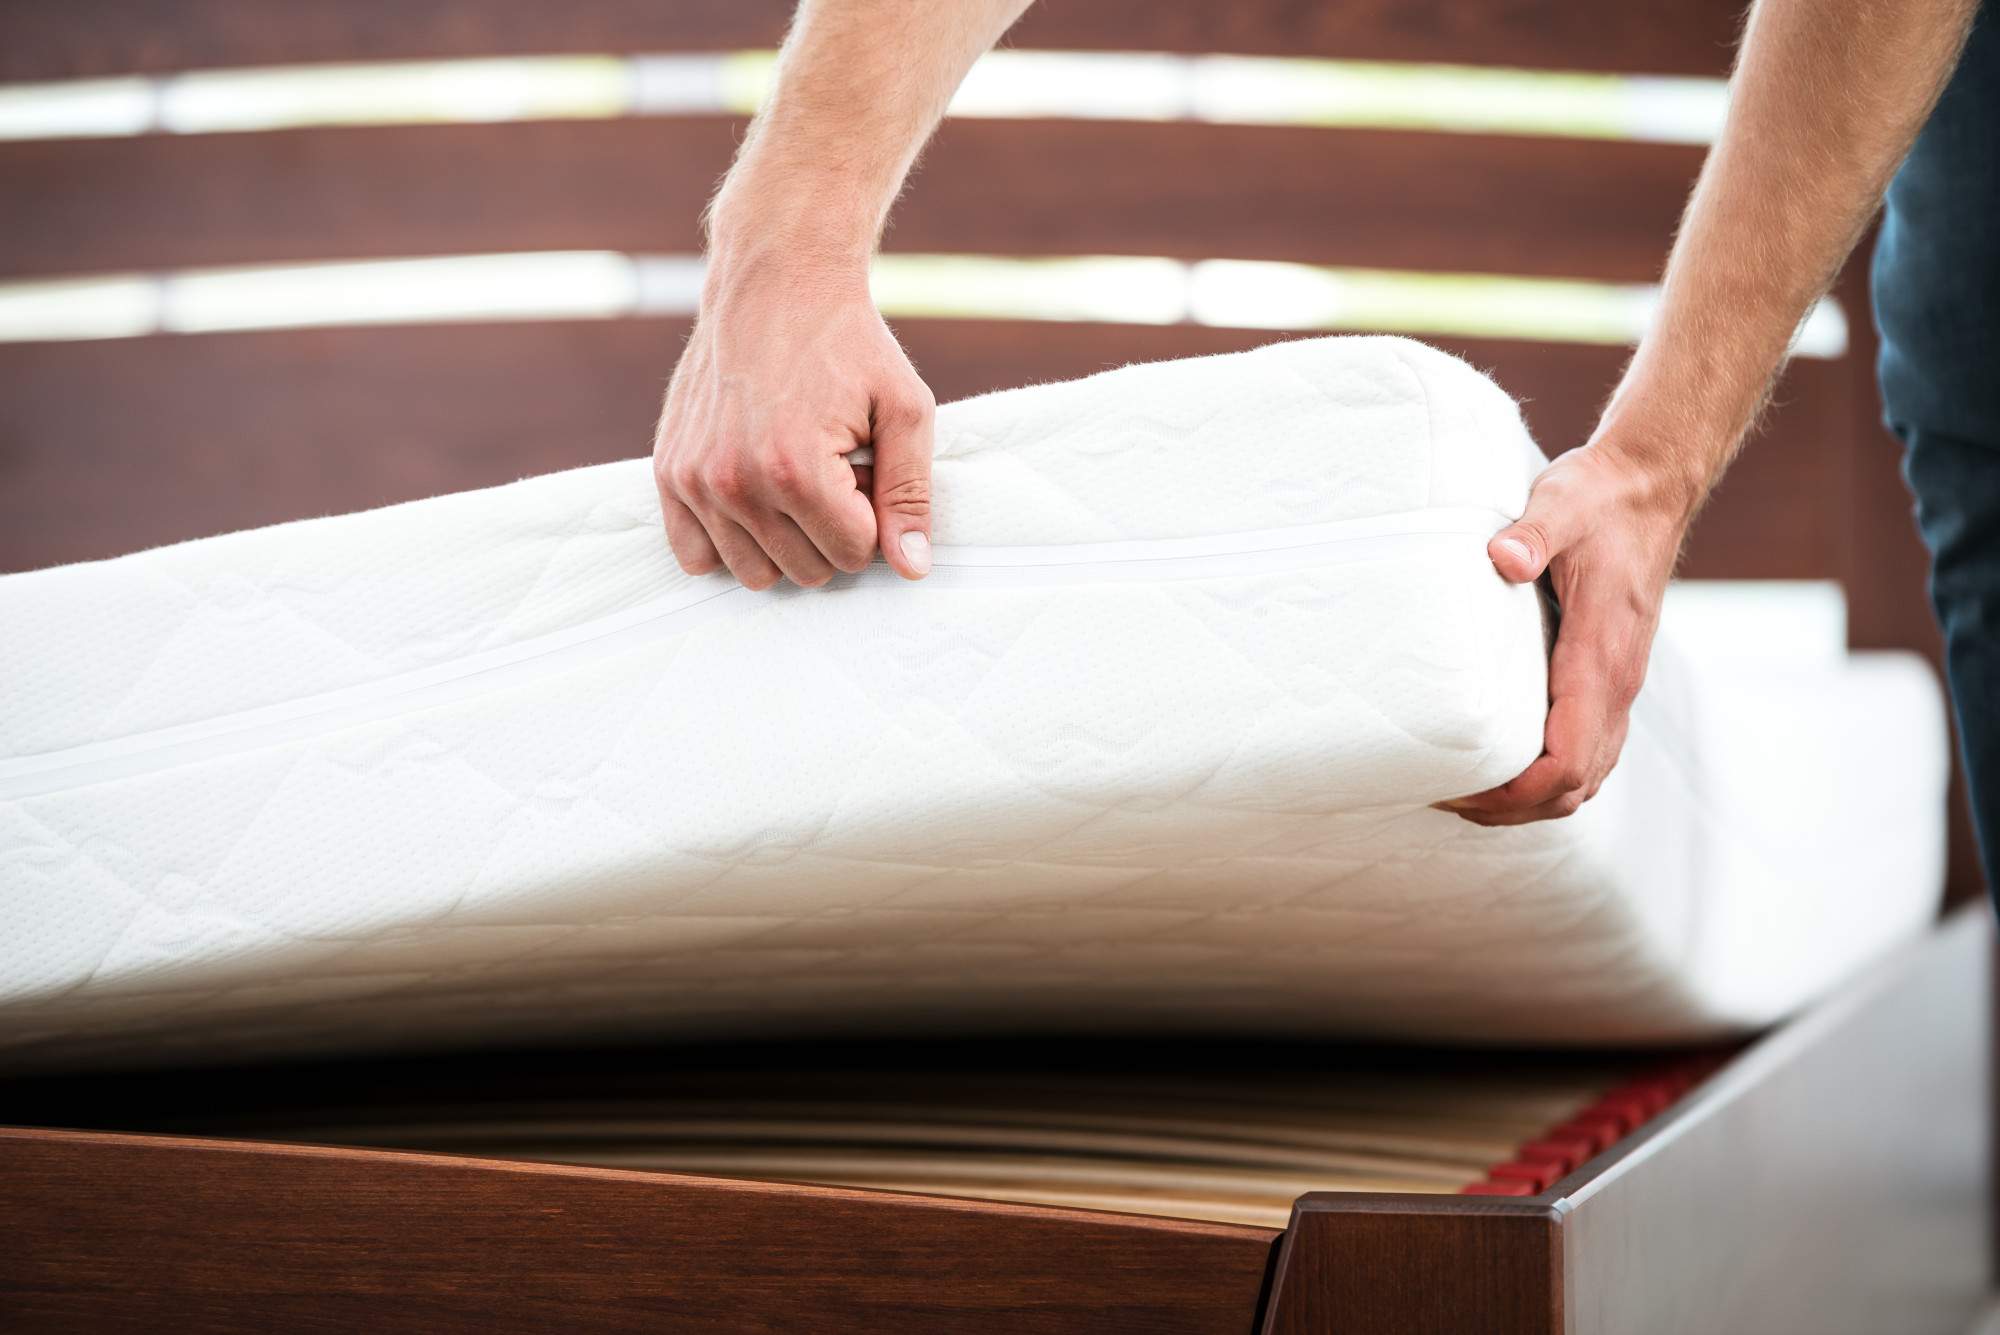 What Are the Main Signs You Need a New Mattress?